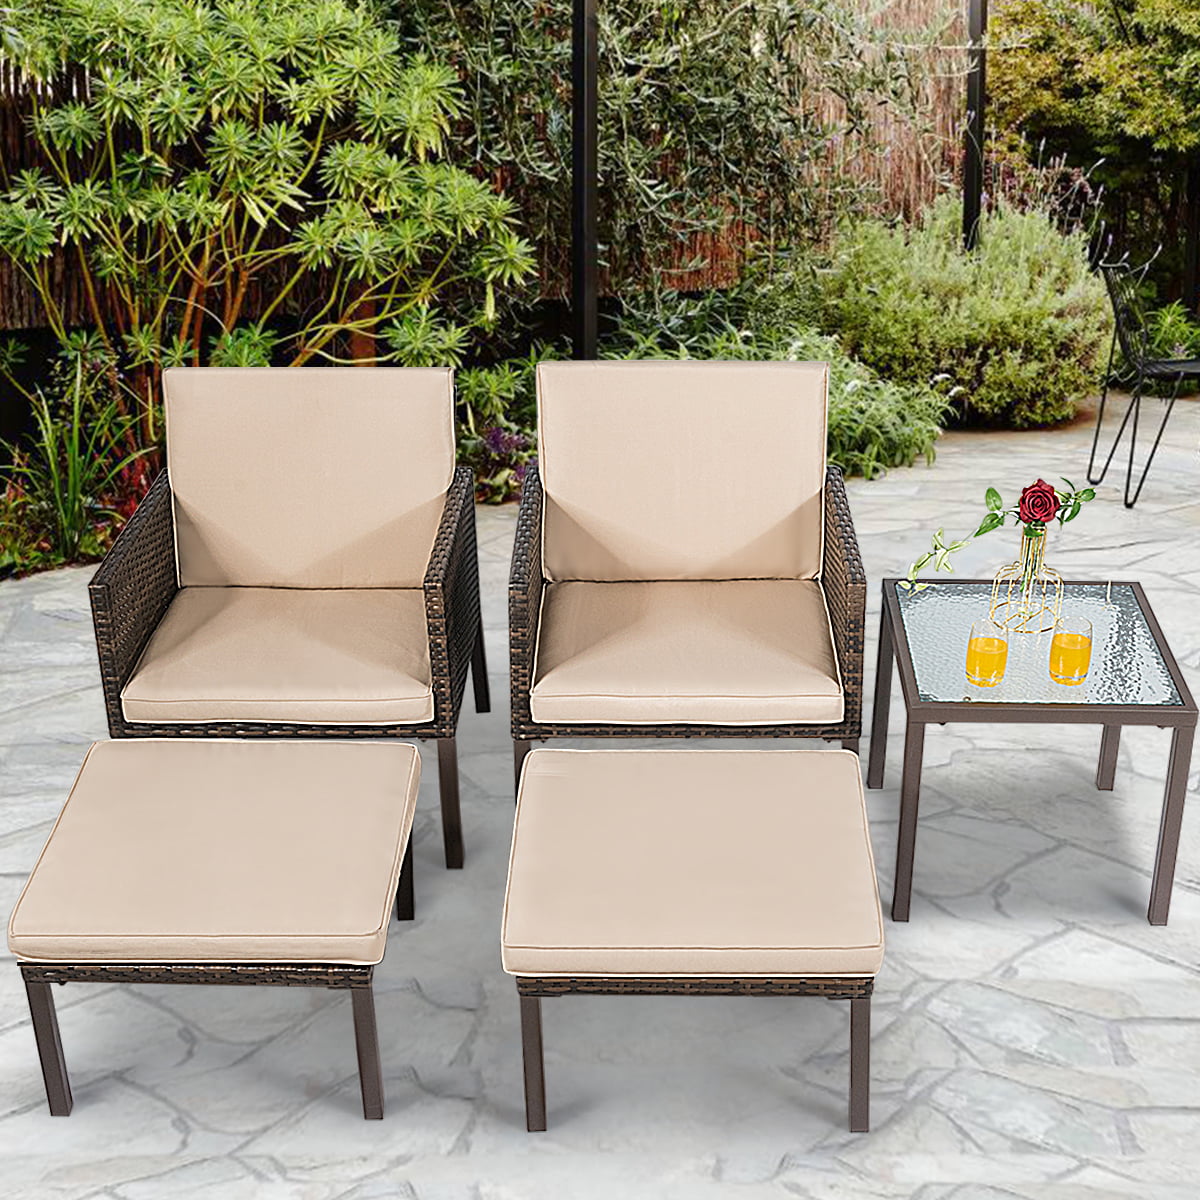 5 pieces outdoor patio furniture set rattan chairs and table - walmart